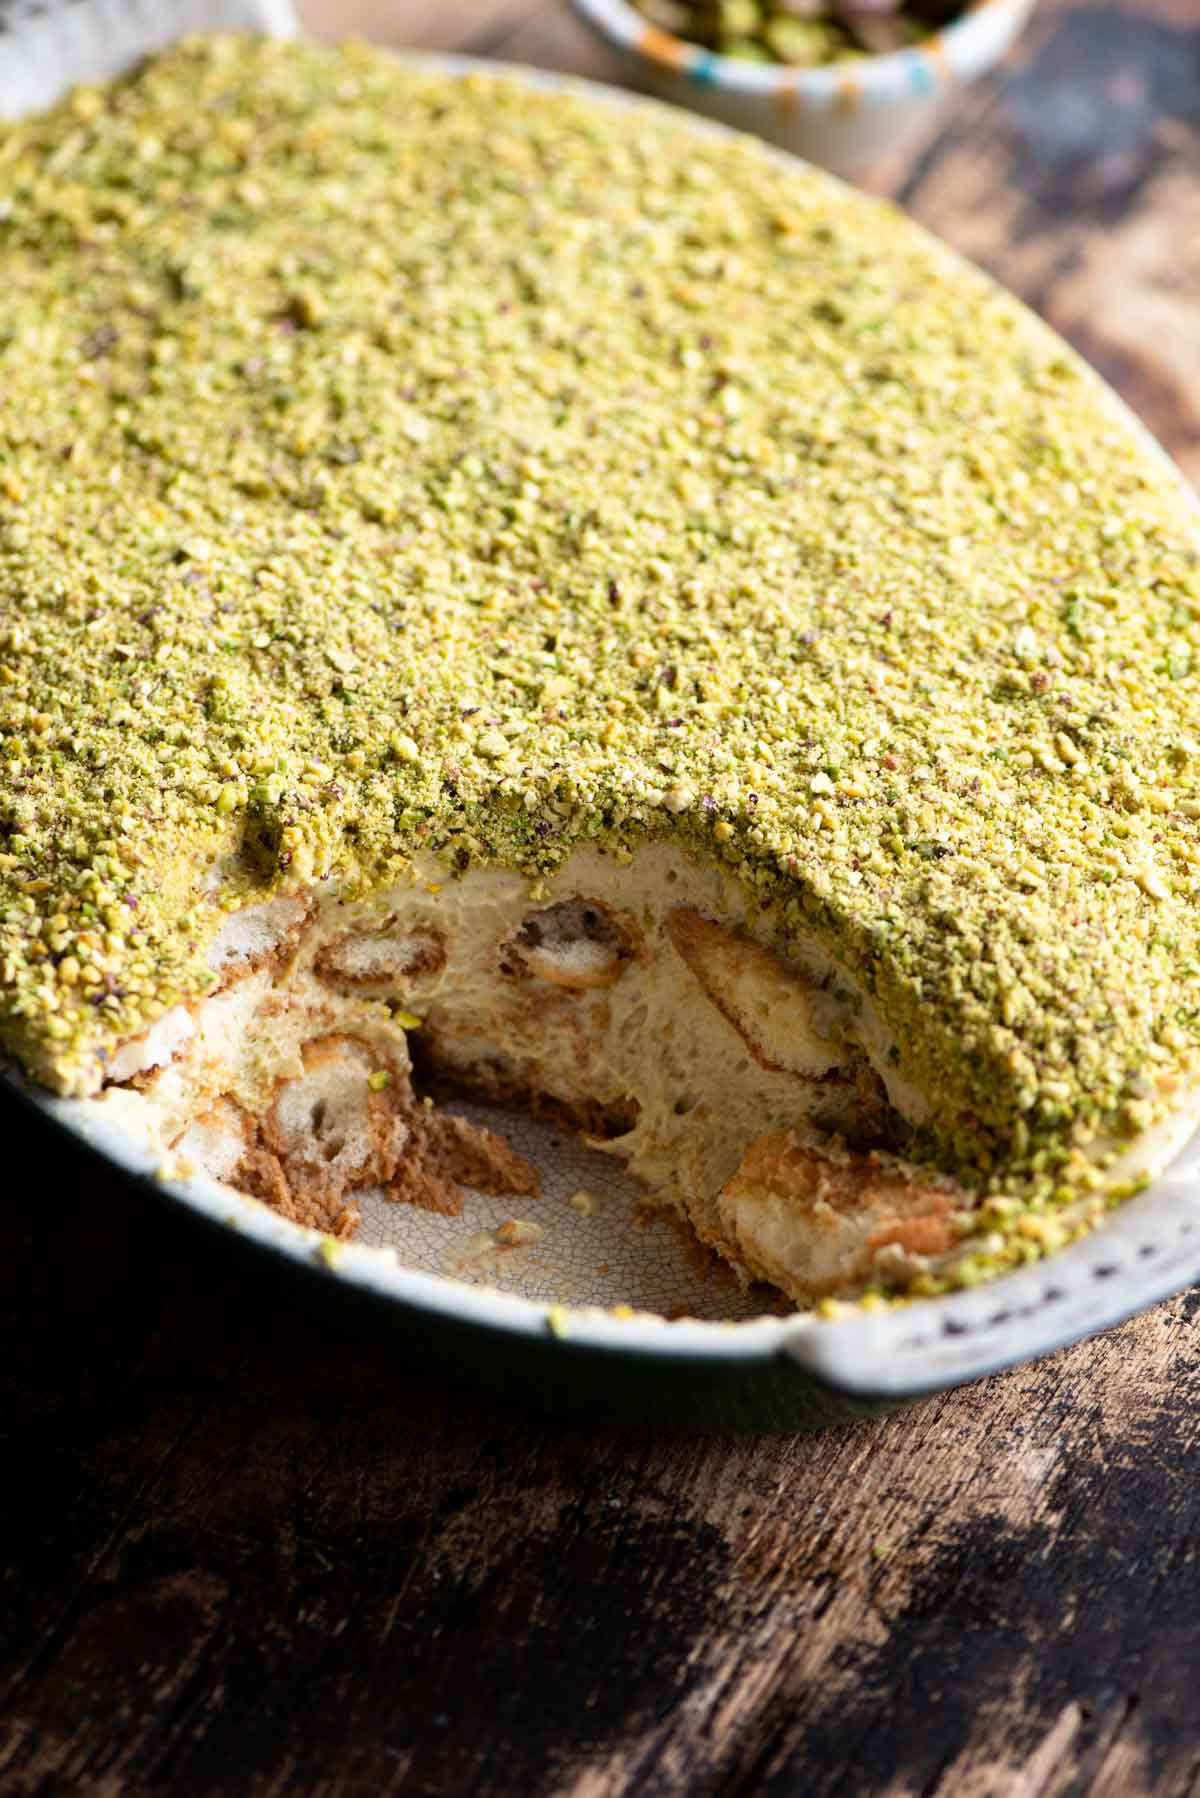 A side shot of a pistachio tiramisu in an oval dish with a slice removed. The background is wooden.